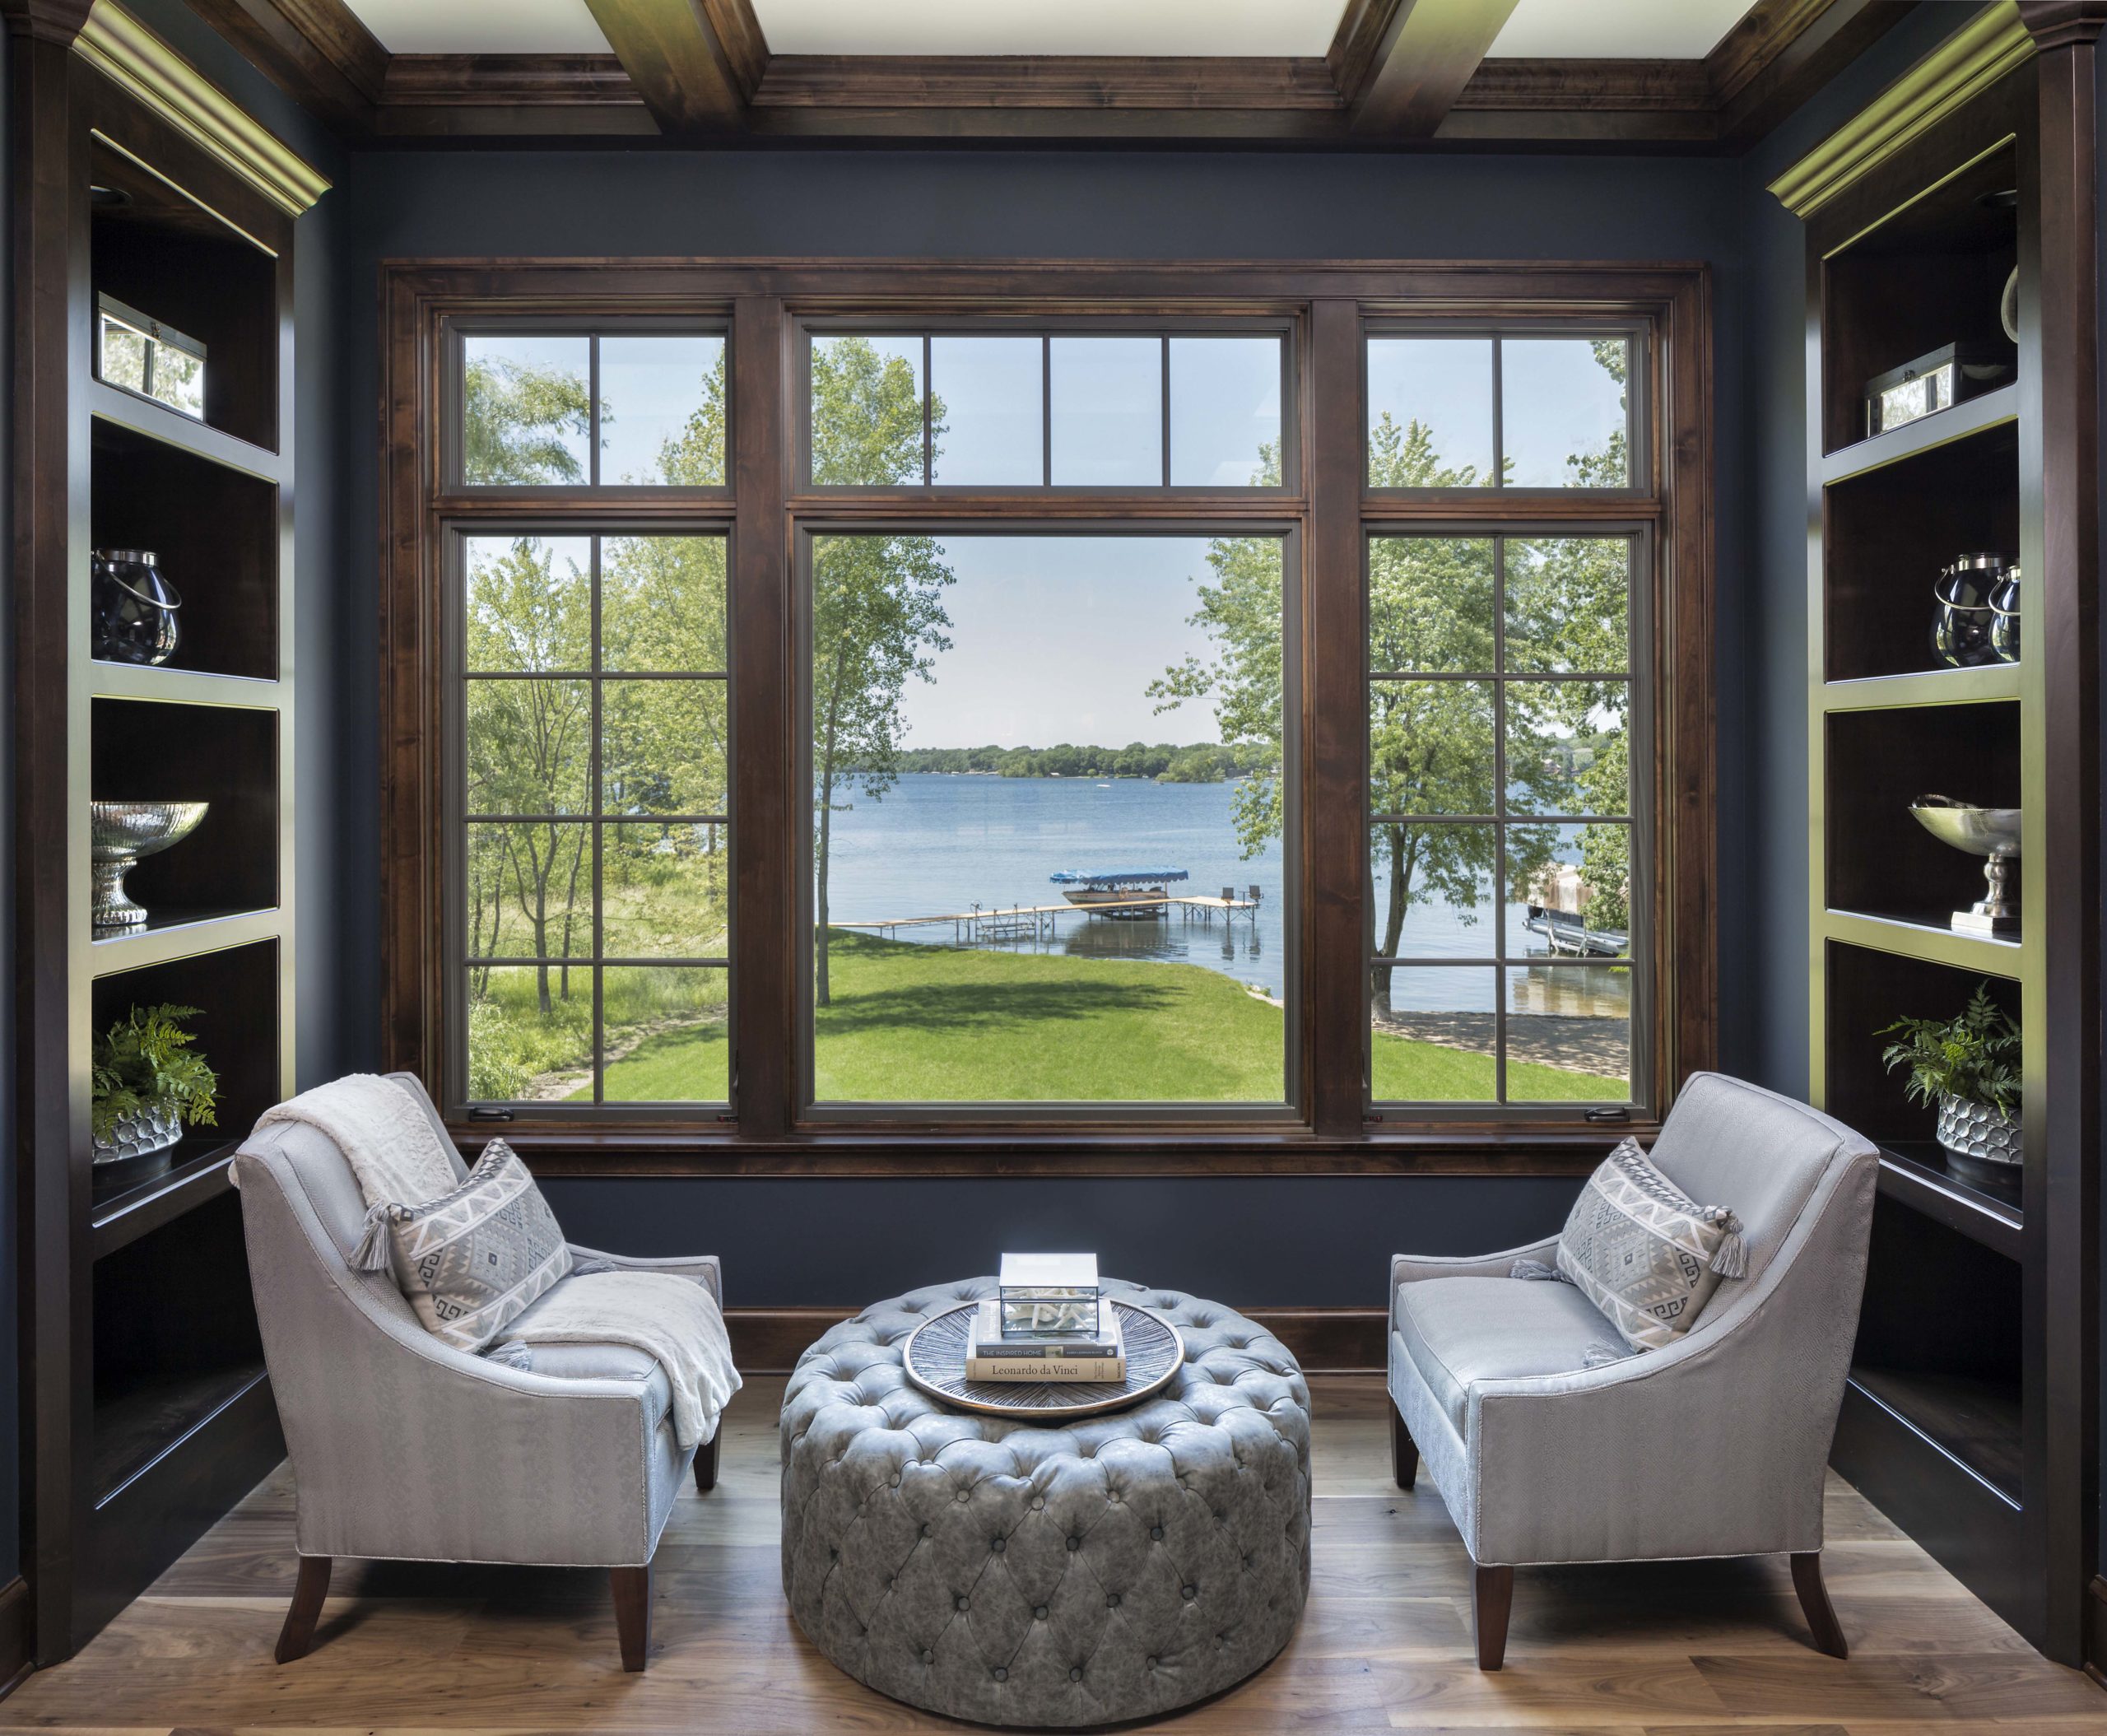 A living room with a large window overlooking a lake.